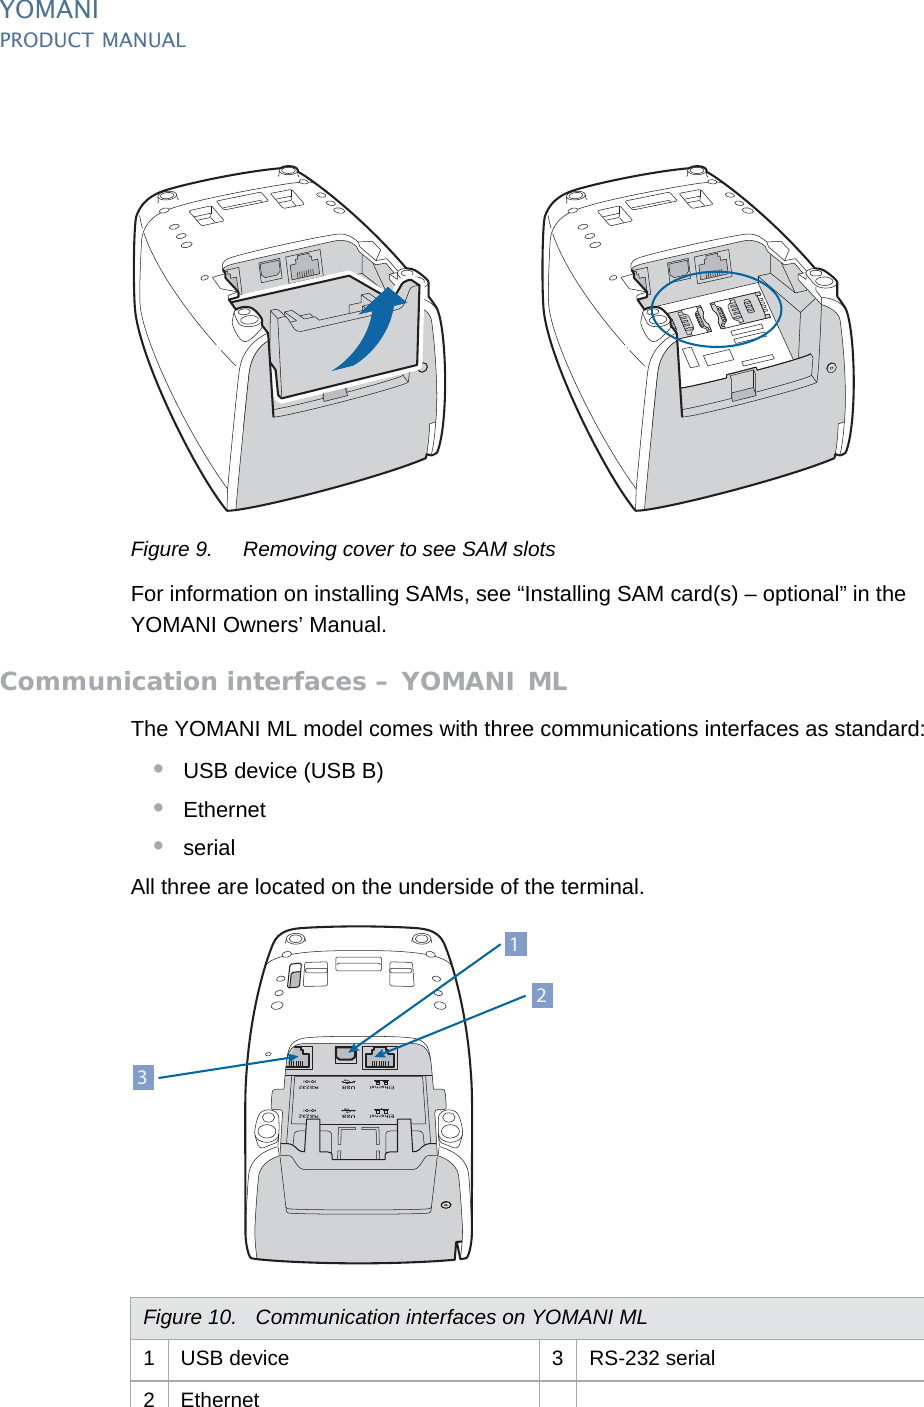 YOMANIPRODUCT MANUAL10  PUBLIClast updated 8/11/13 document release 2.1 pm_ymn_keyFeatures.fmFigure 9. Removing cover to see SAM slotsFor information on installing SAMs, see “Installing SAM card(s) – optional” in the YOMANI Owners’ Manual.Communication interfaces – YOMANI MLThe YOMANI ML model comes with three communications interfaces as standard:•USB device (USB B)•Ethernet•serialAll three are located on the underside of the terminal.Figure 10. Communication interfaces on YOMANI ML1 USB device 3 RS-232 serial2 Ethernet132